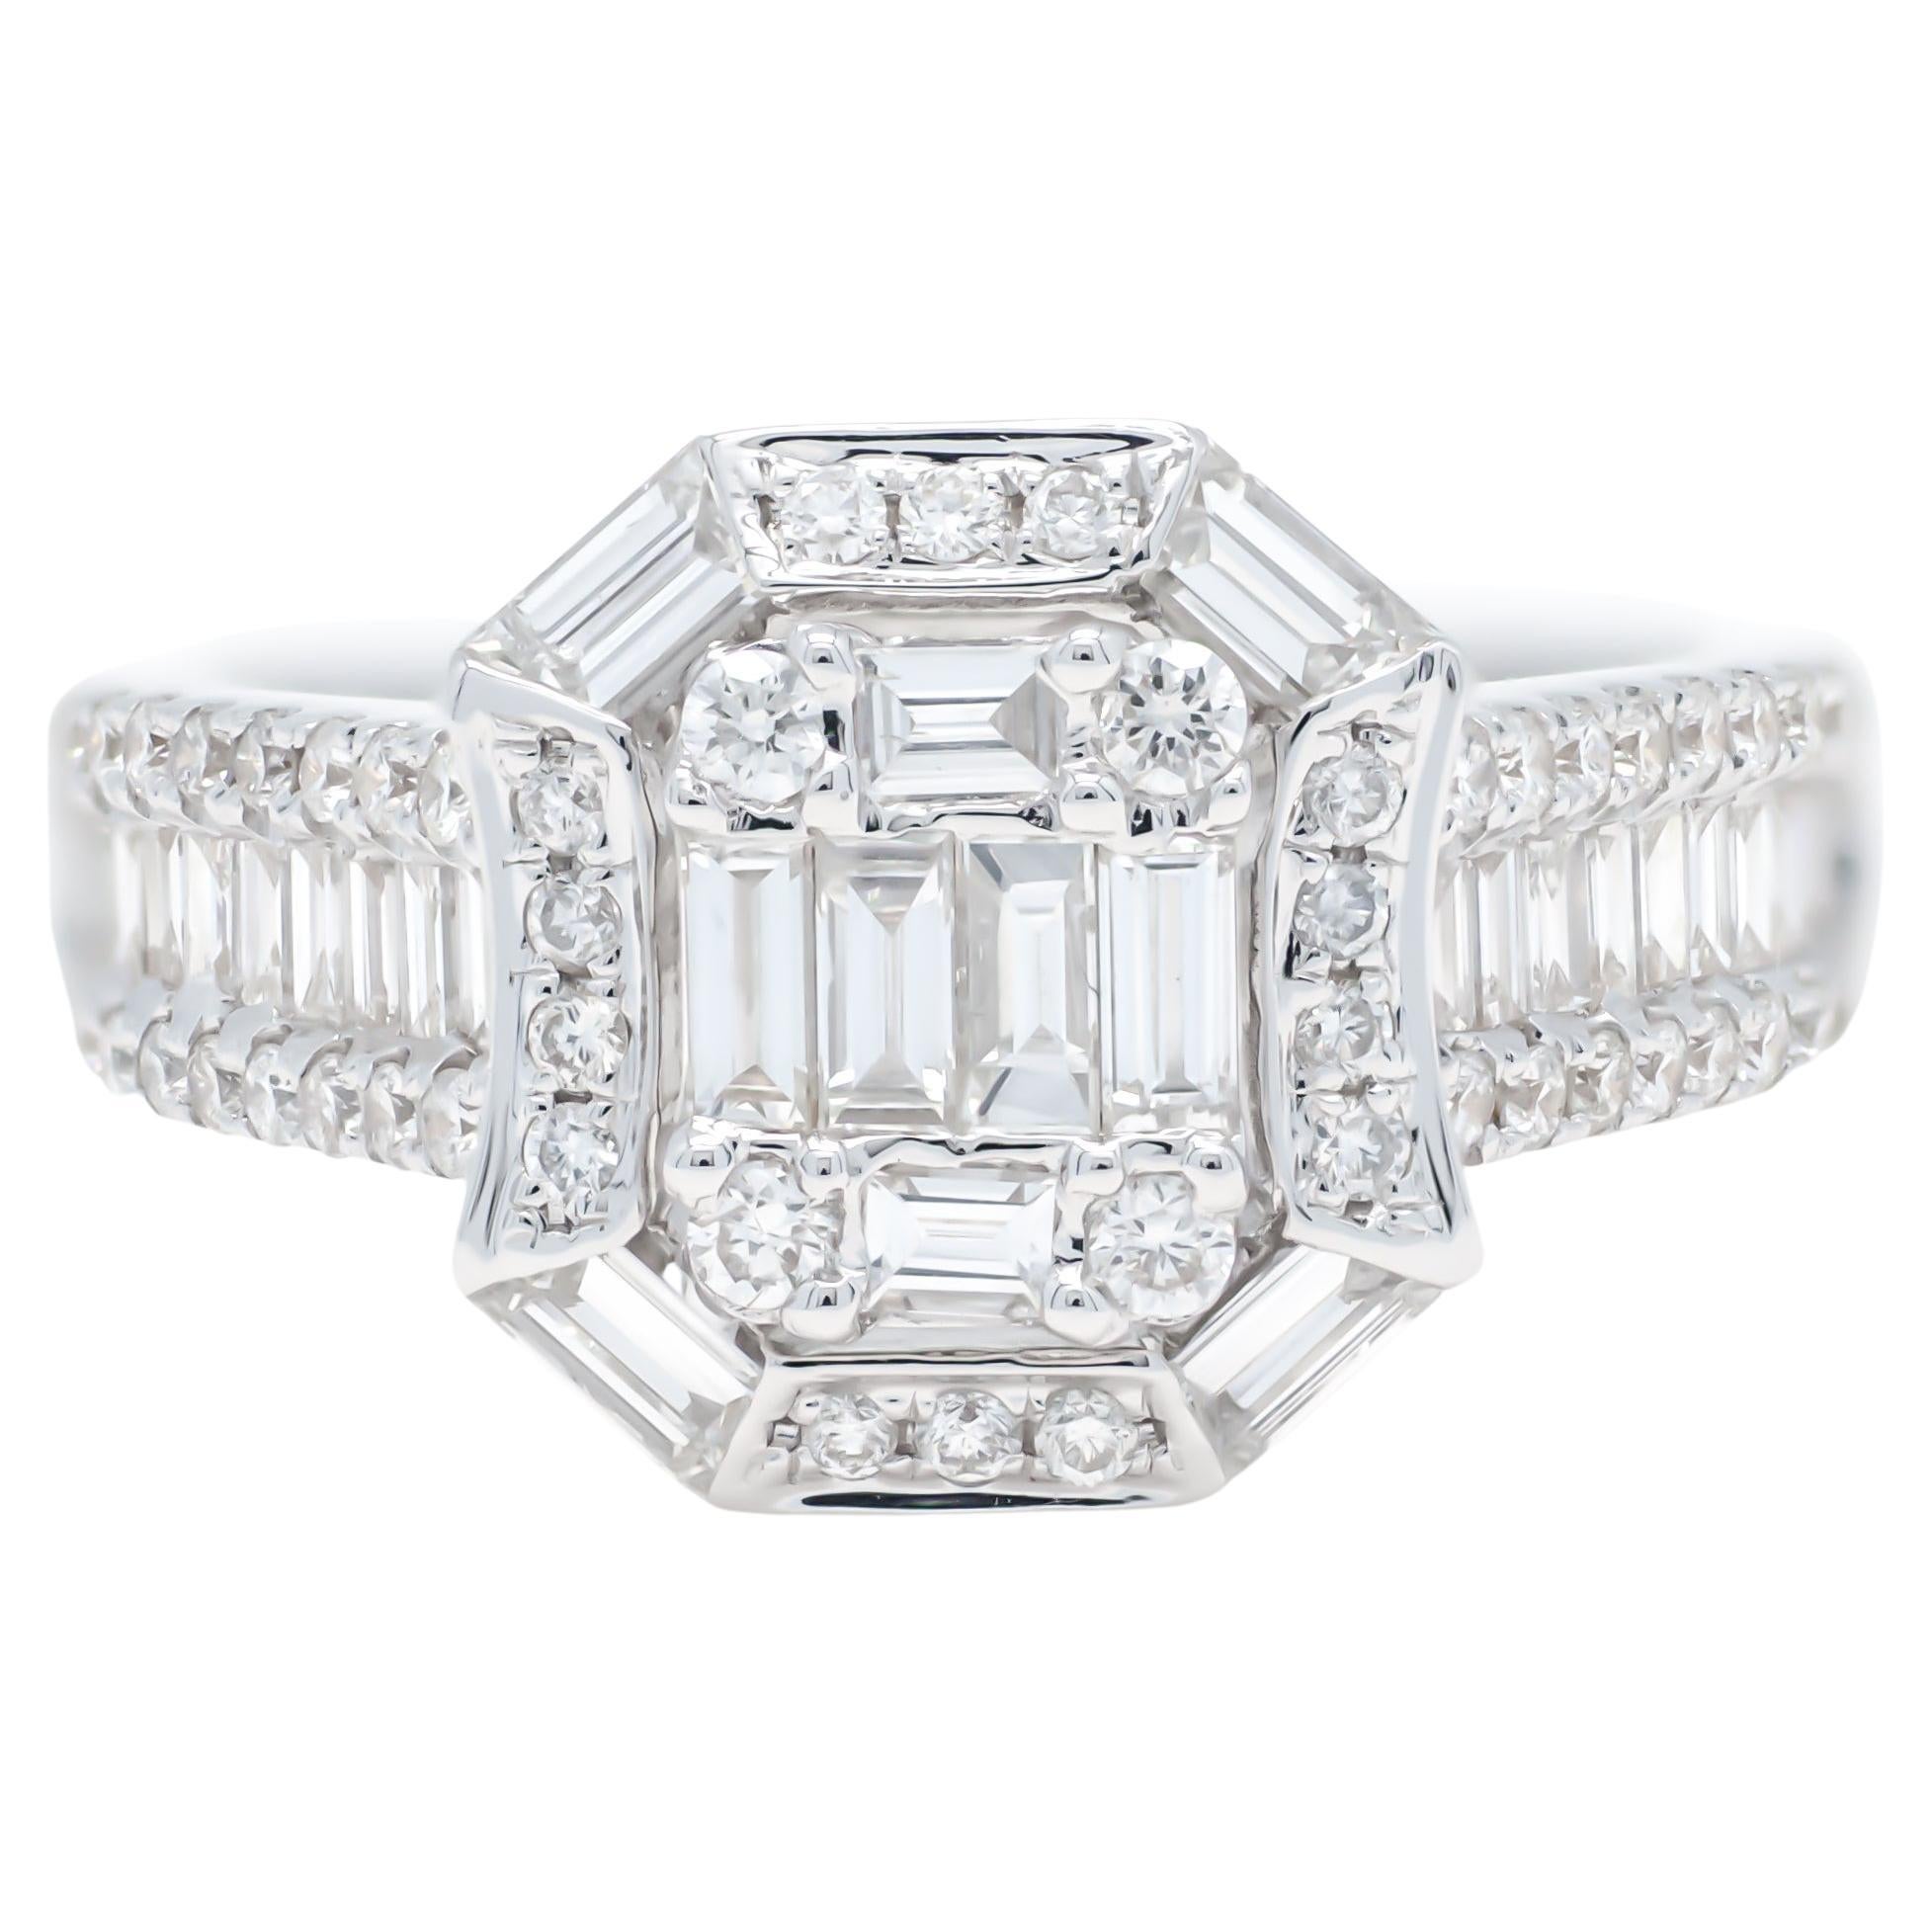 Say 'I do' to forever with this stunning 18KT White Gold Art Deco Baguette Round Diamond Cluster Halo Engagement Ring. The vintage-inspired design features a sparkling cluster of round diamonds encased in a halo of baguette diamonds set in an